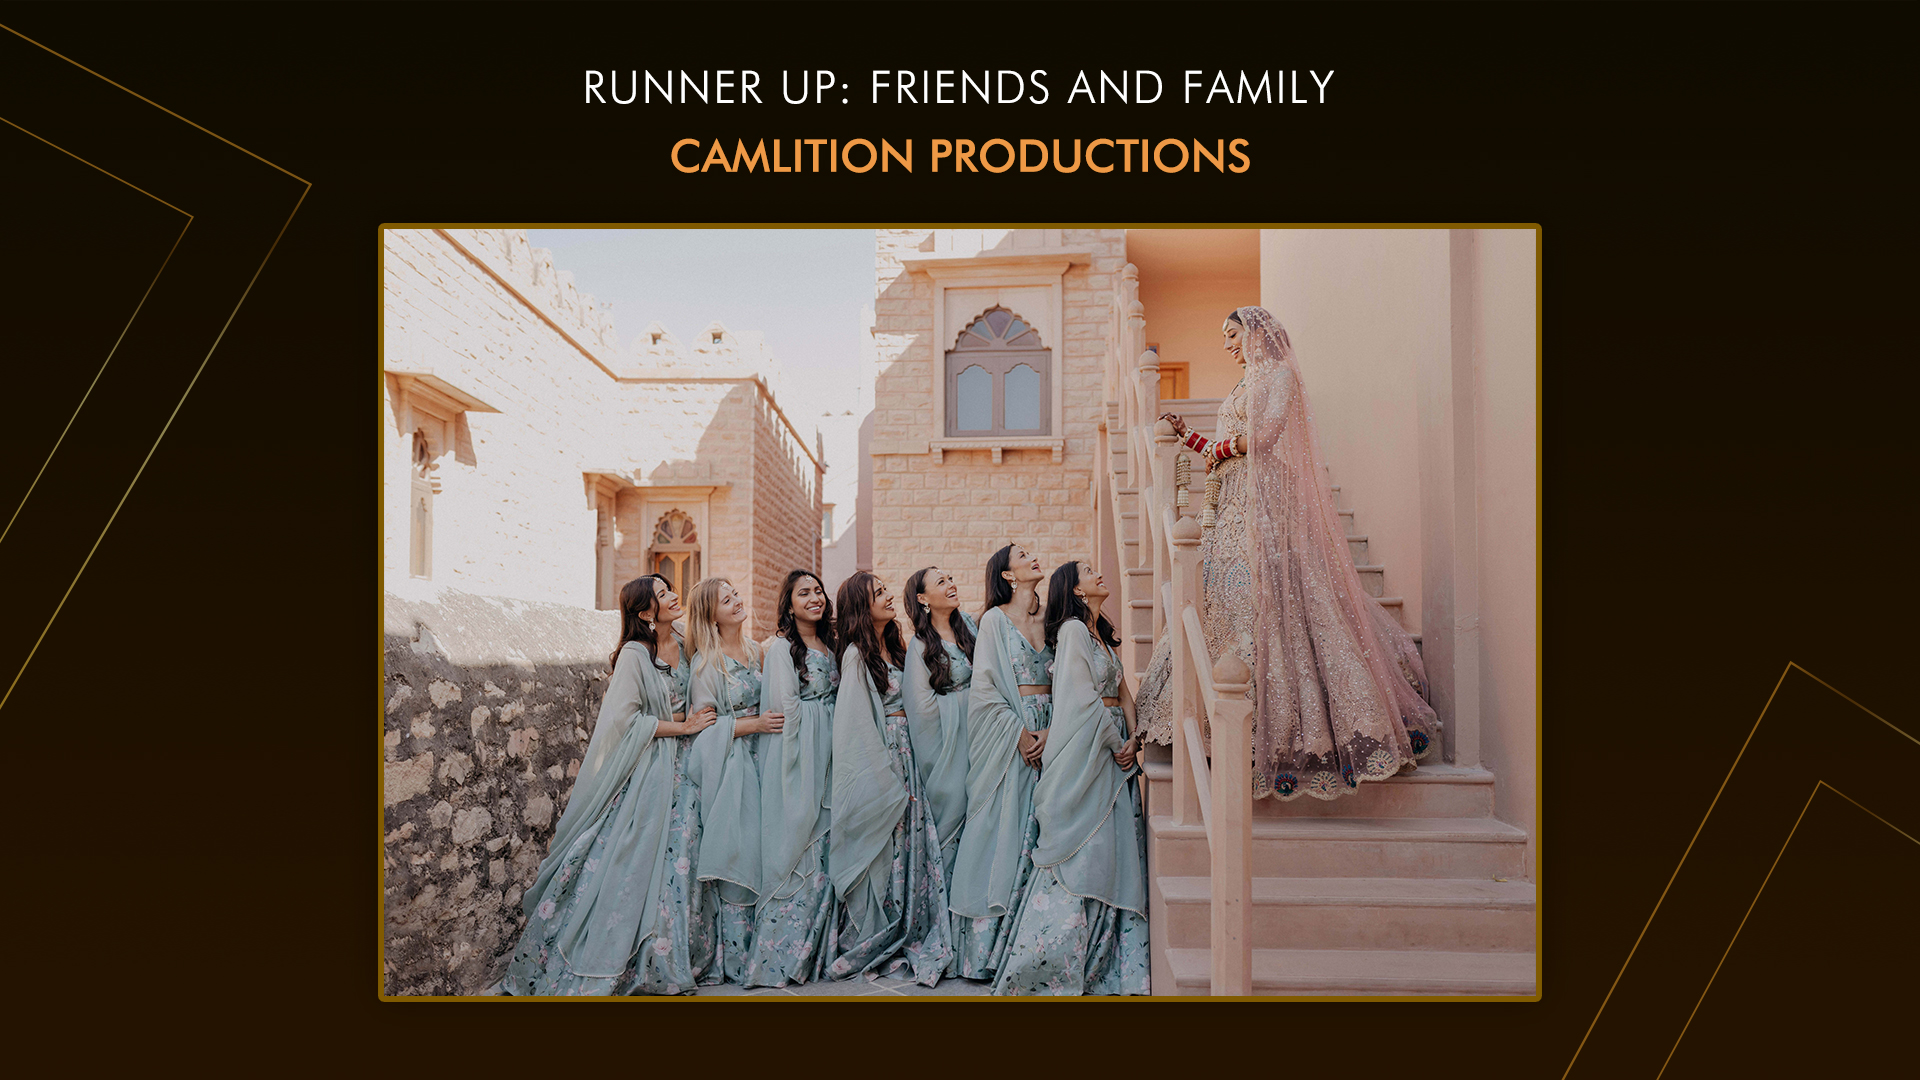 Camlition Productions